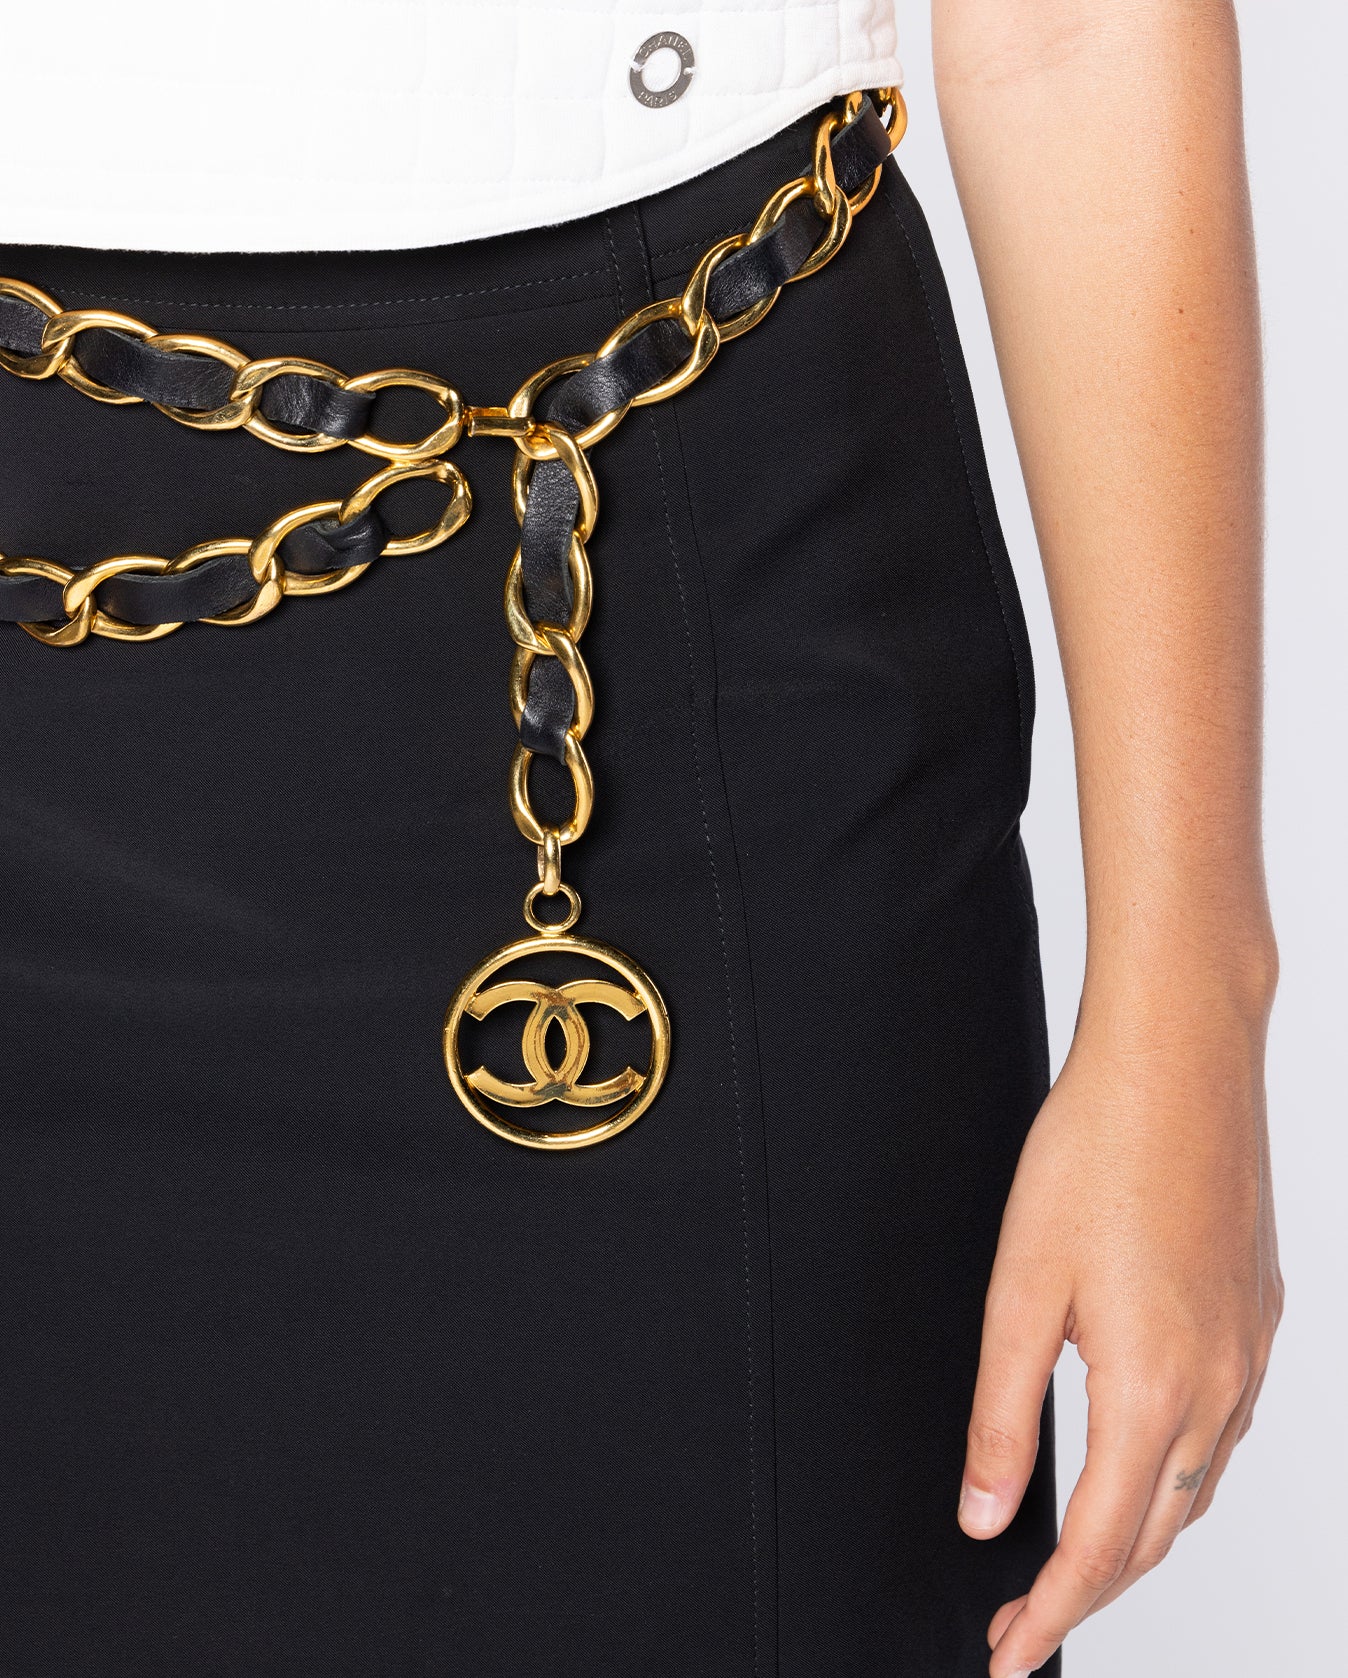 chanel purse with chain